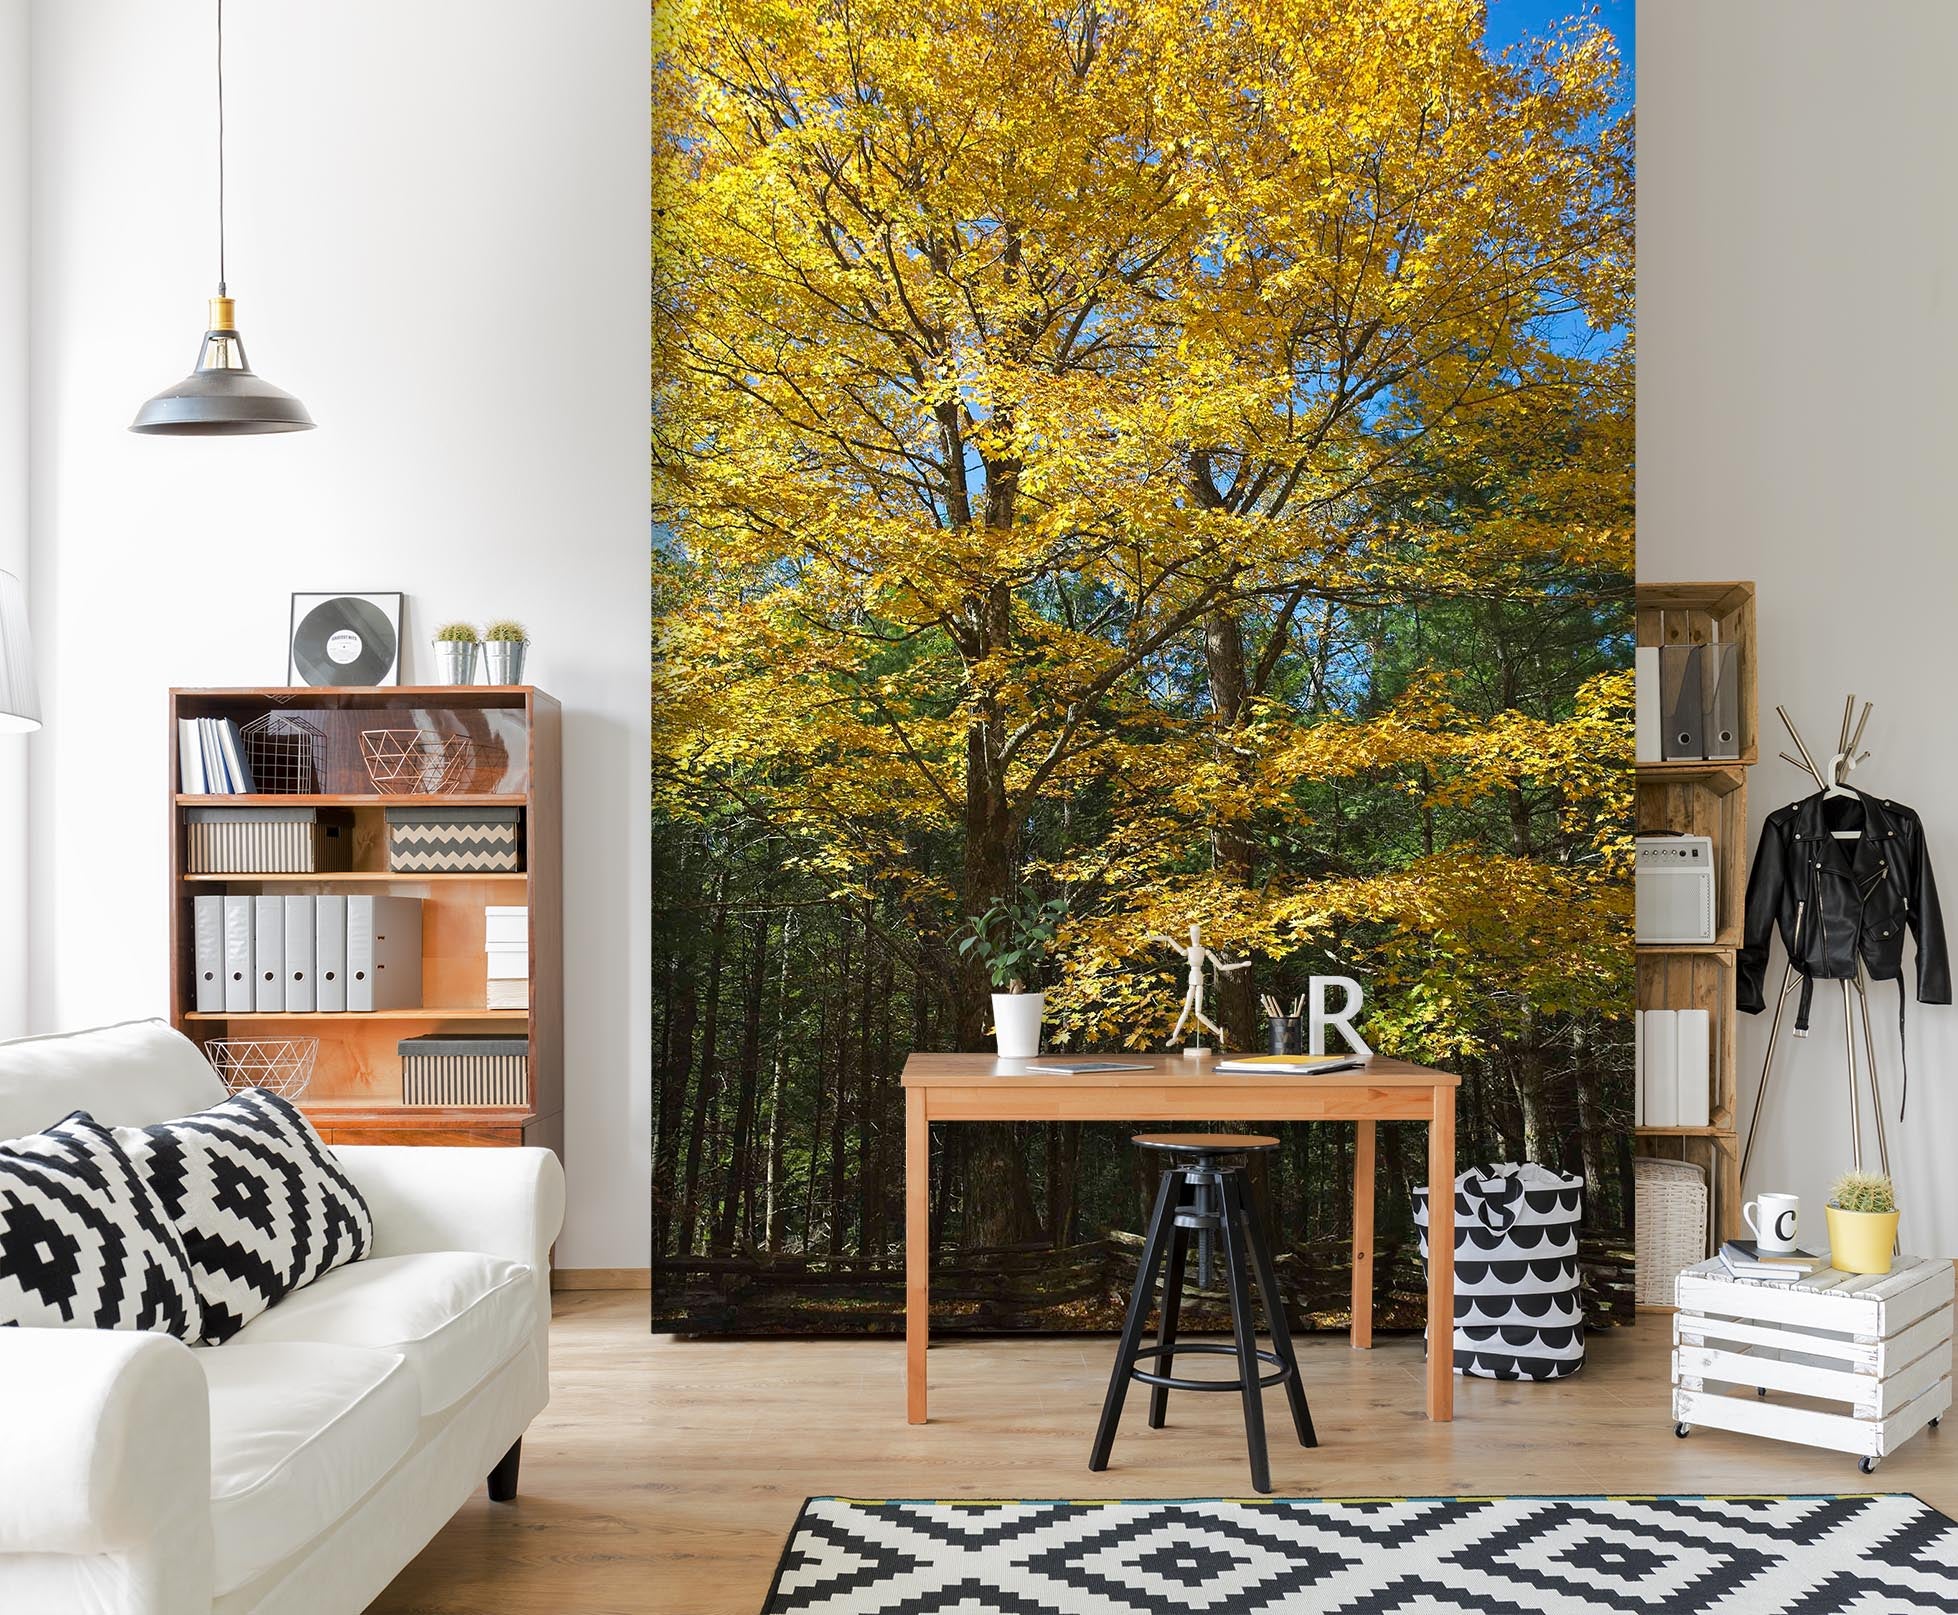 3D Sunny Forest 1401 Kathy Barefield Wall Mural Wall Murals